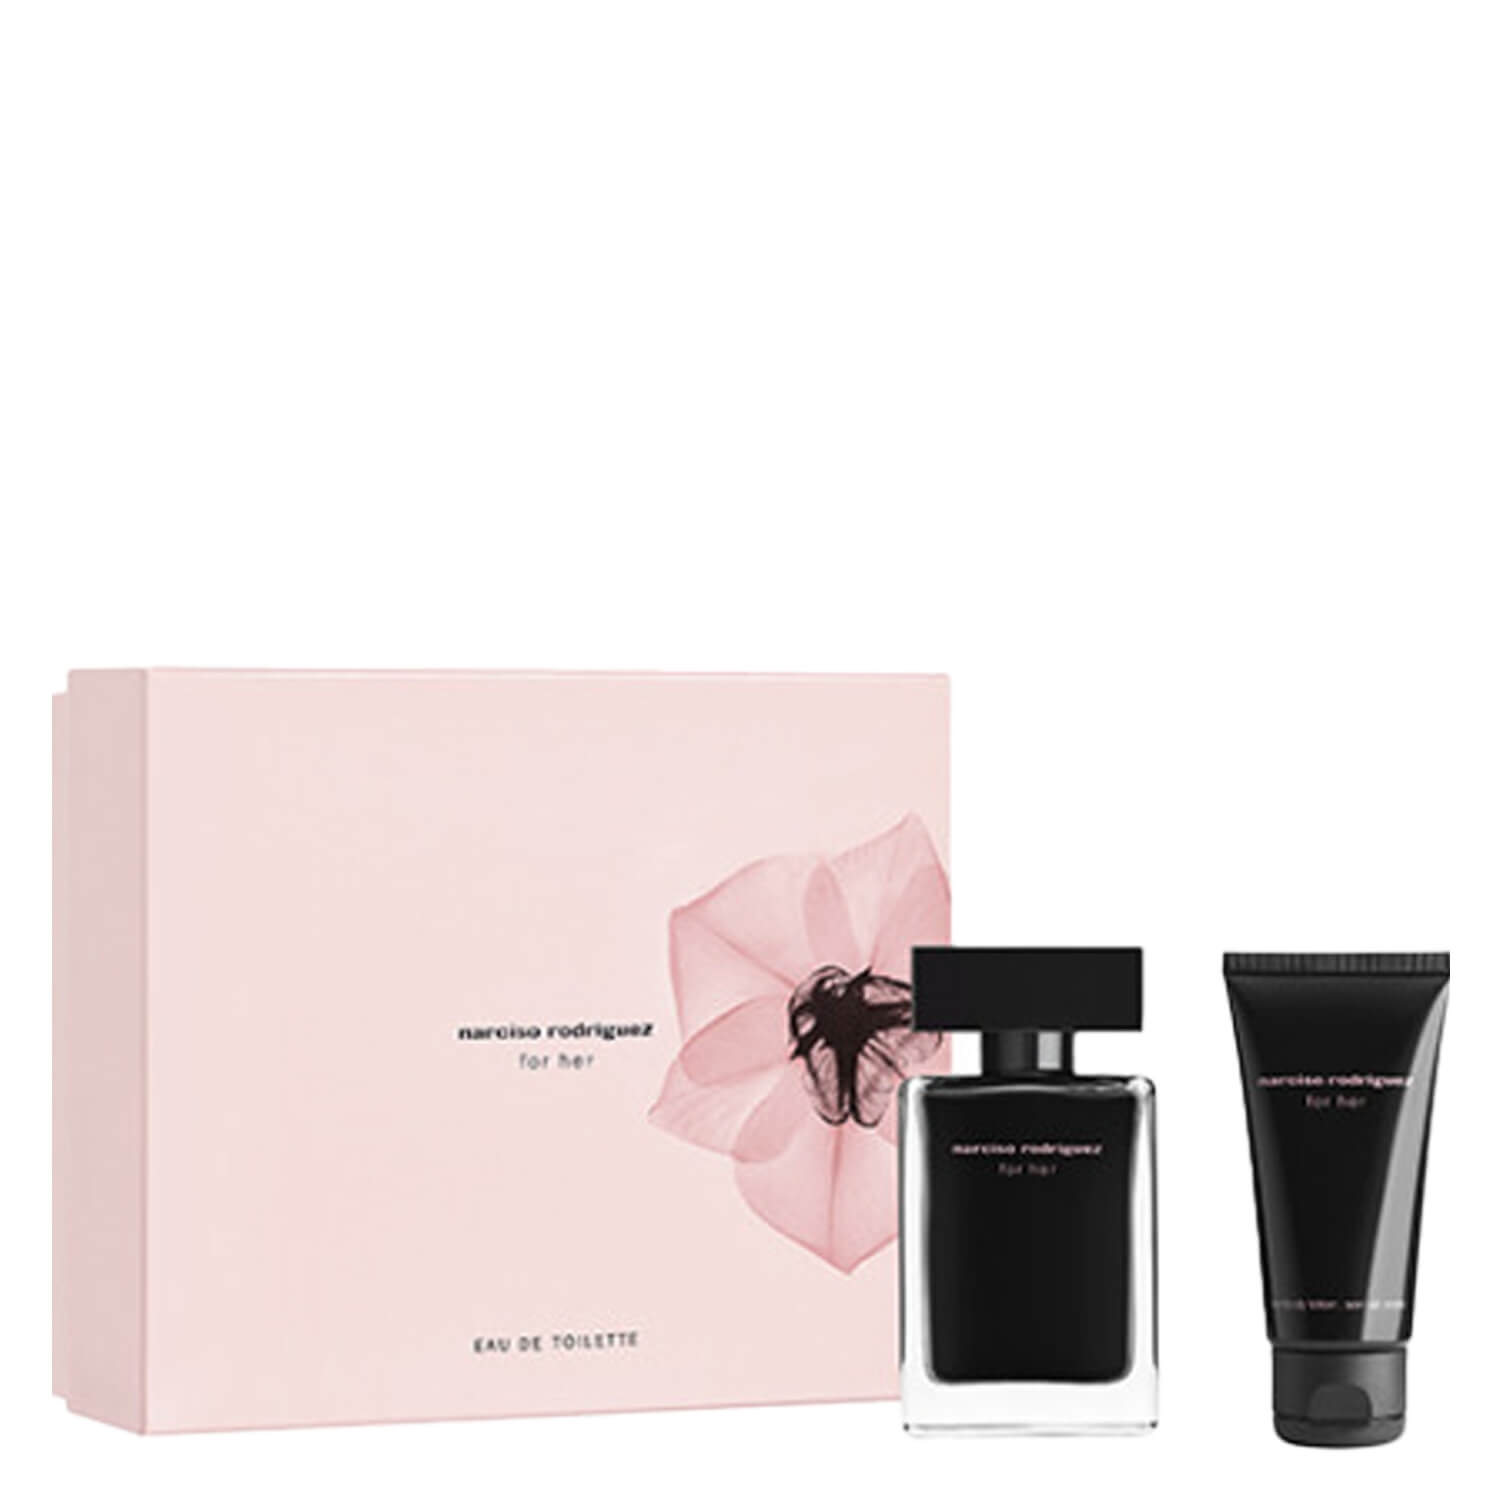 Product image from Narciso – For her Eau de Toilette Set